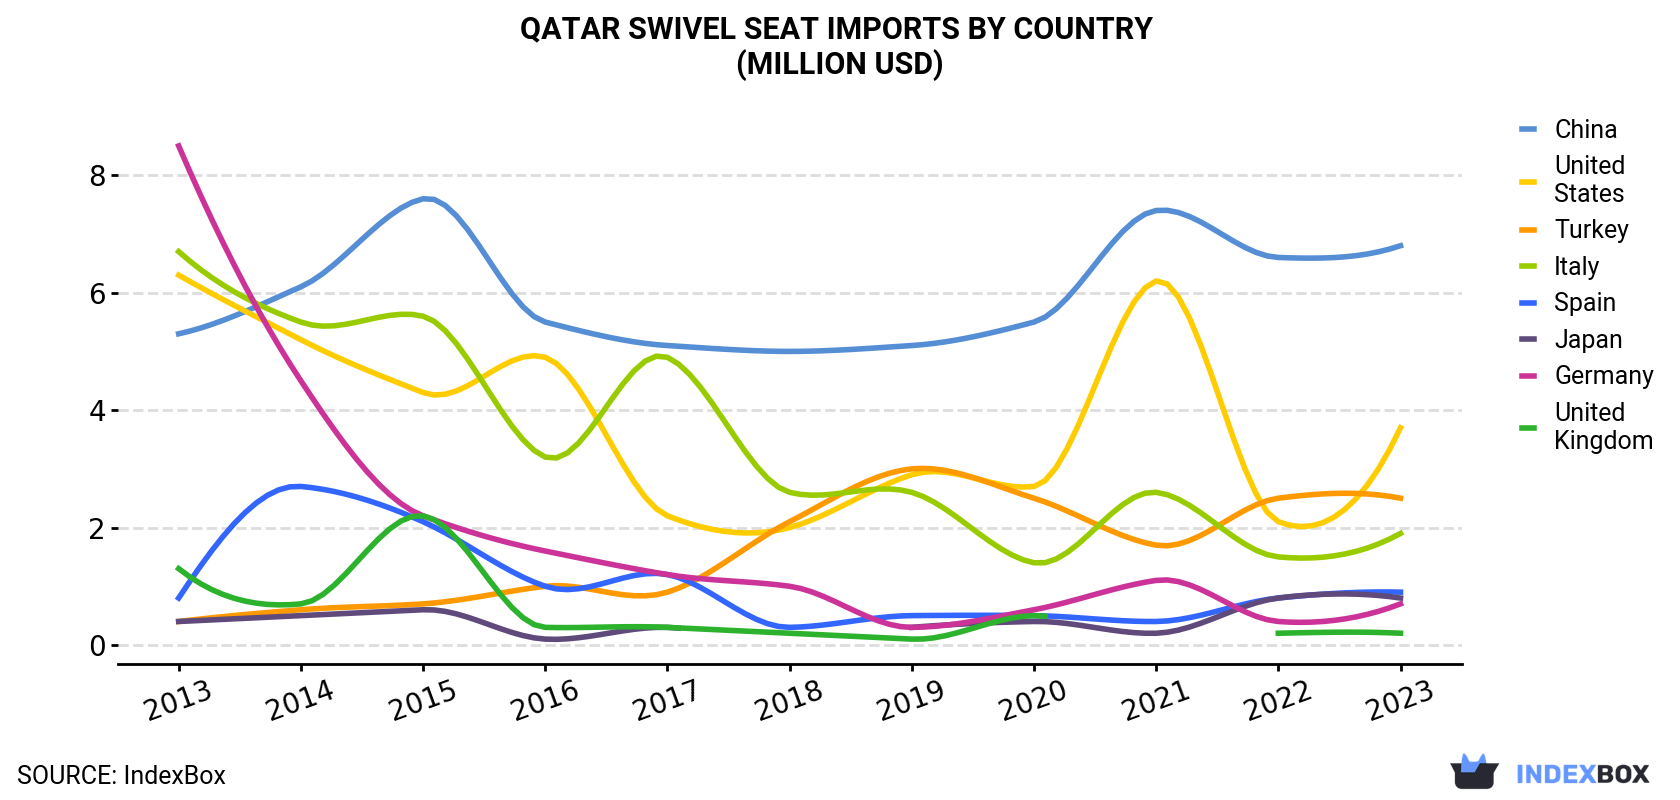 Qatar Swivel Seat Imports By Country (Million USD)